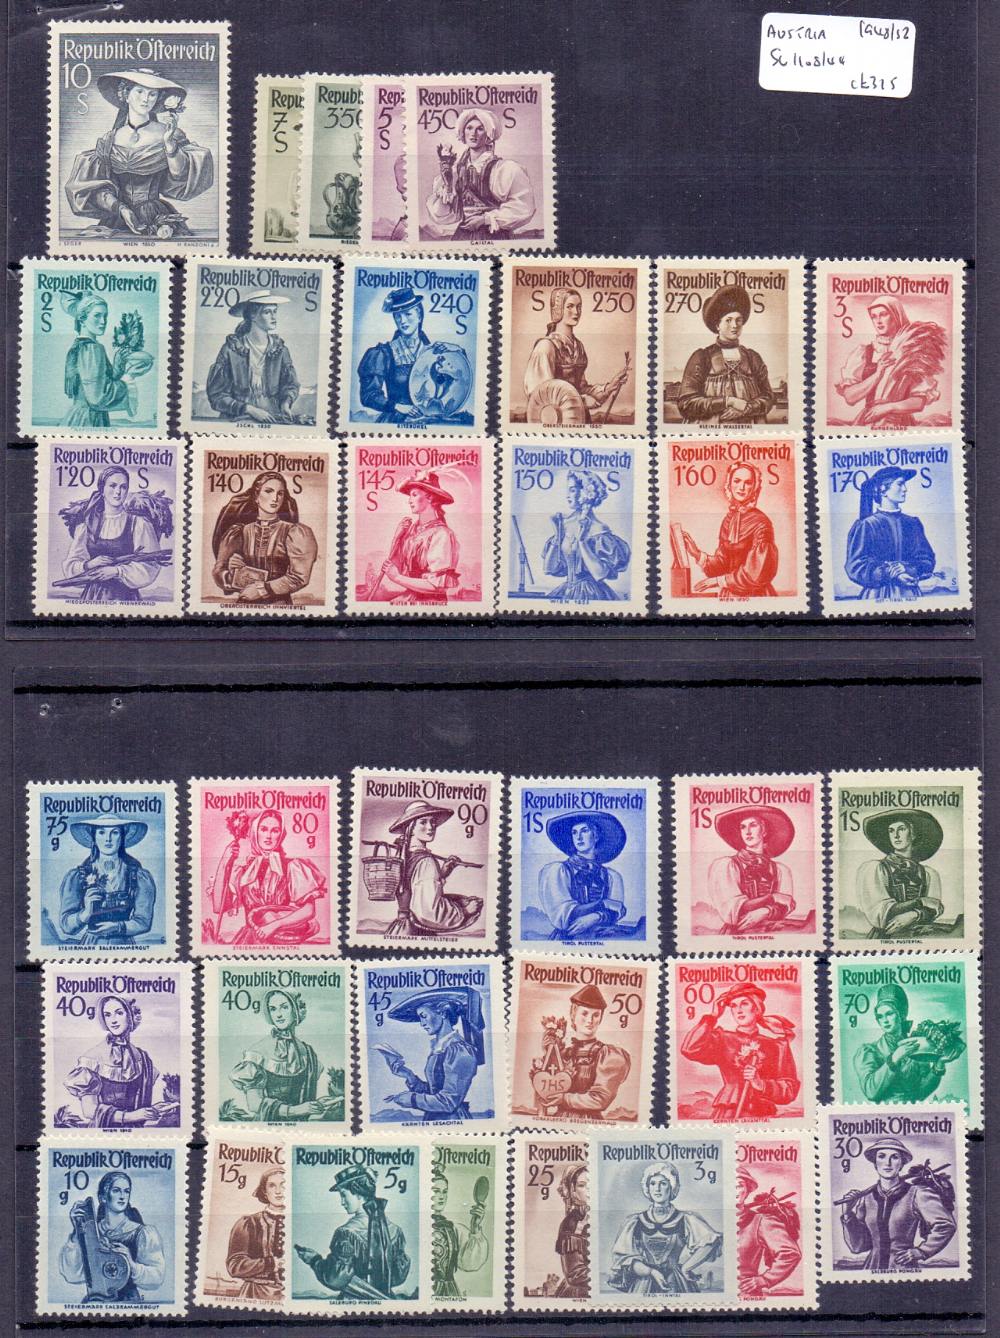 STAMPS : Unsold auction lots , Austria, Latvia, Italy, USA, Spain, Netherlands, Switzerland, France, - Image 8 of 11